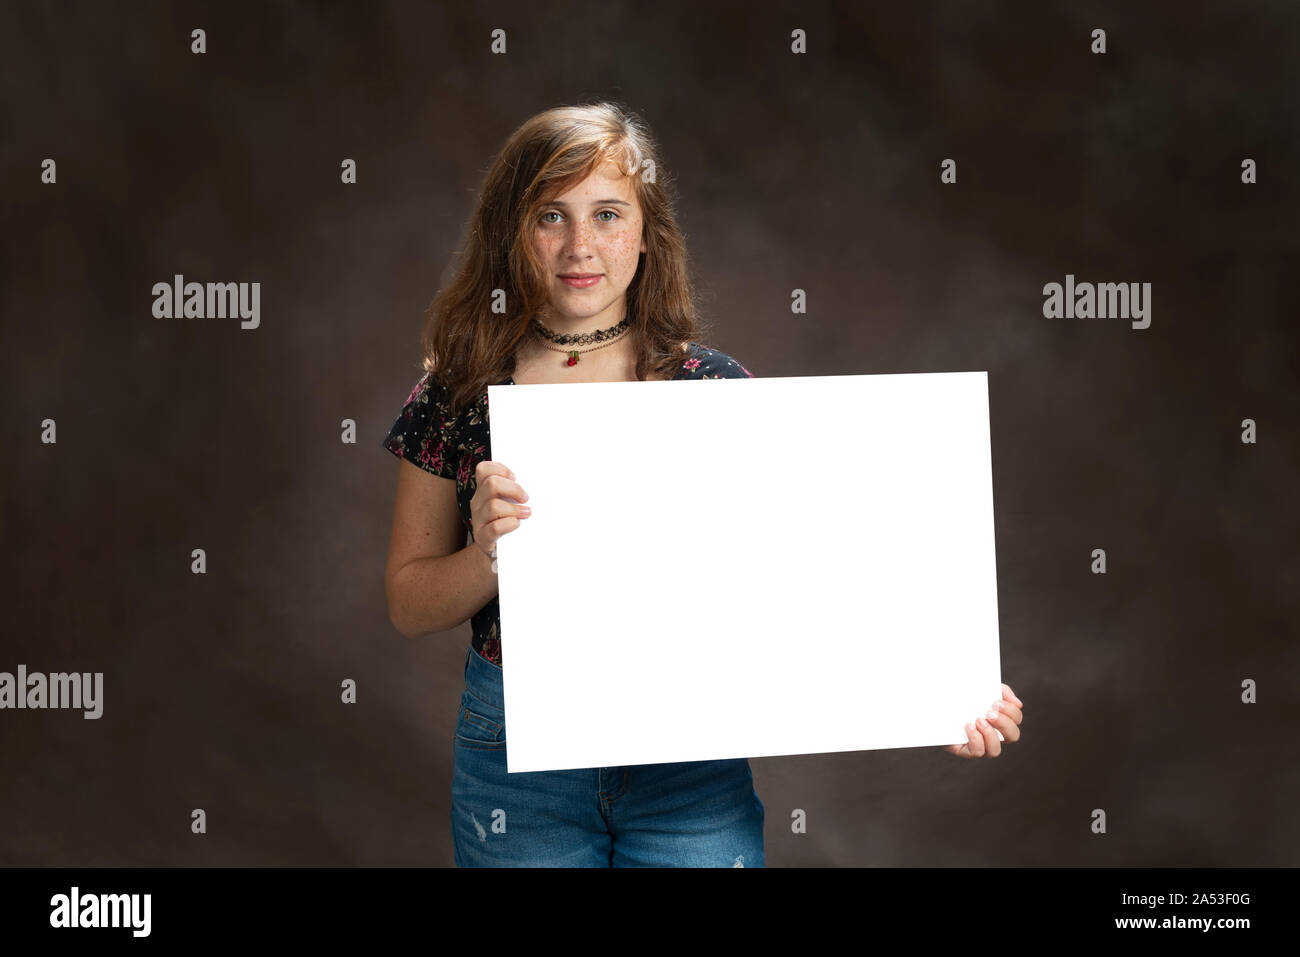 Horizontal shot of a cute pre-teen girl with freckles holding a blank sign. Stock Photo